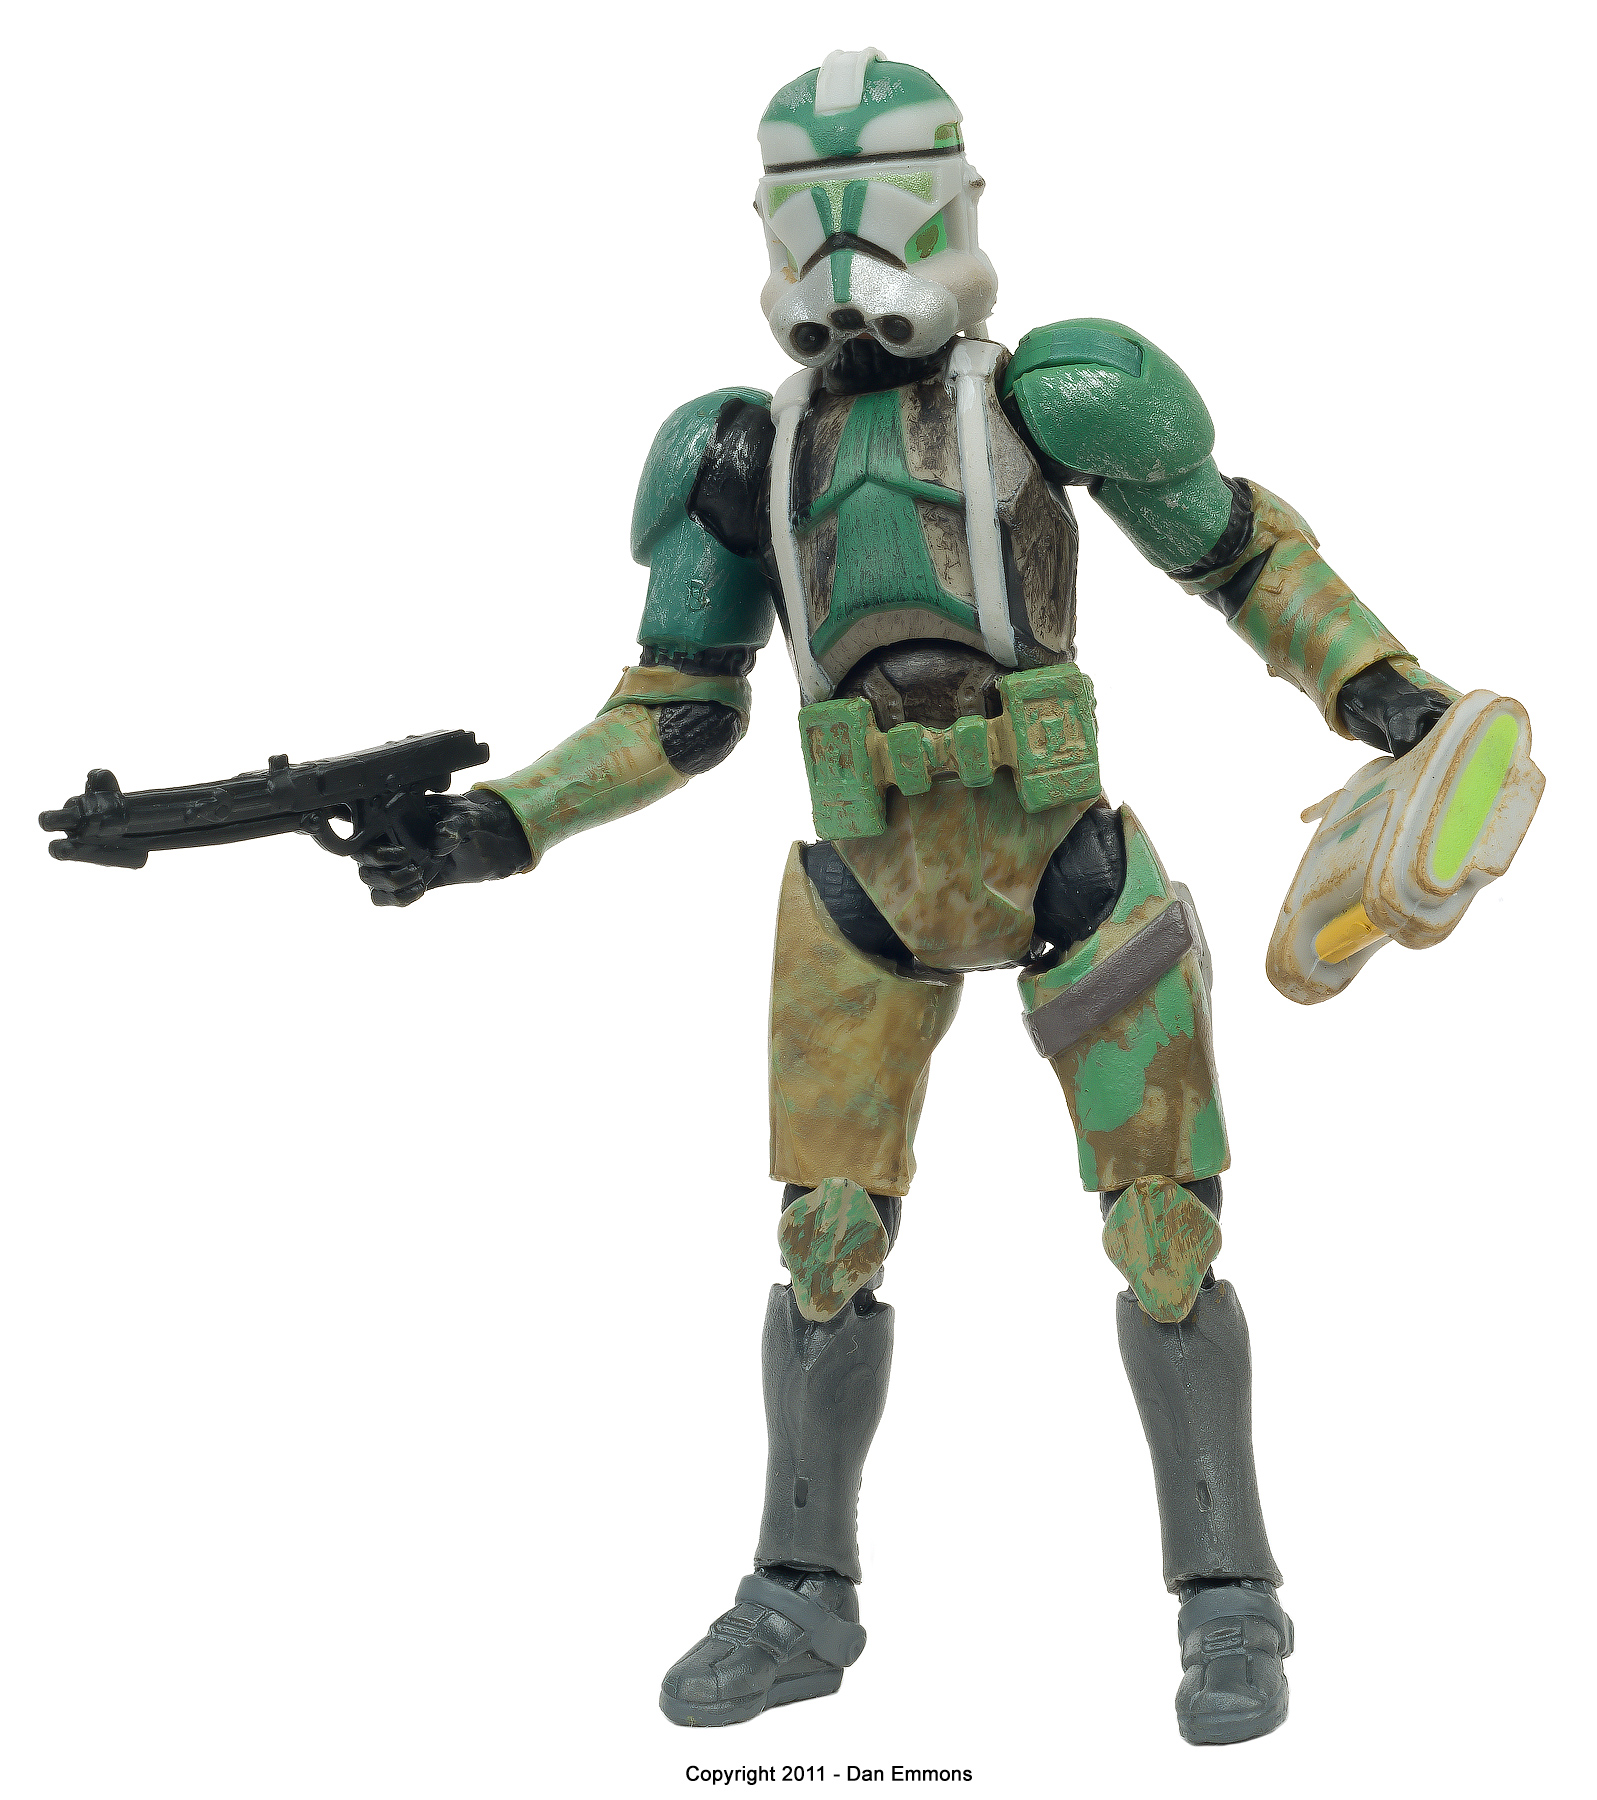 The Vintage Collection - VC43: Commander Gree